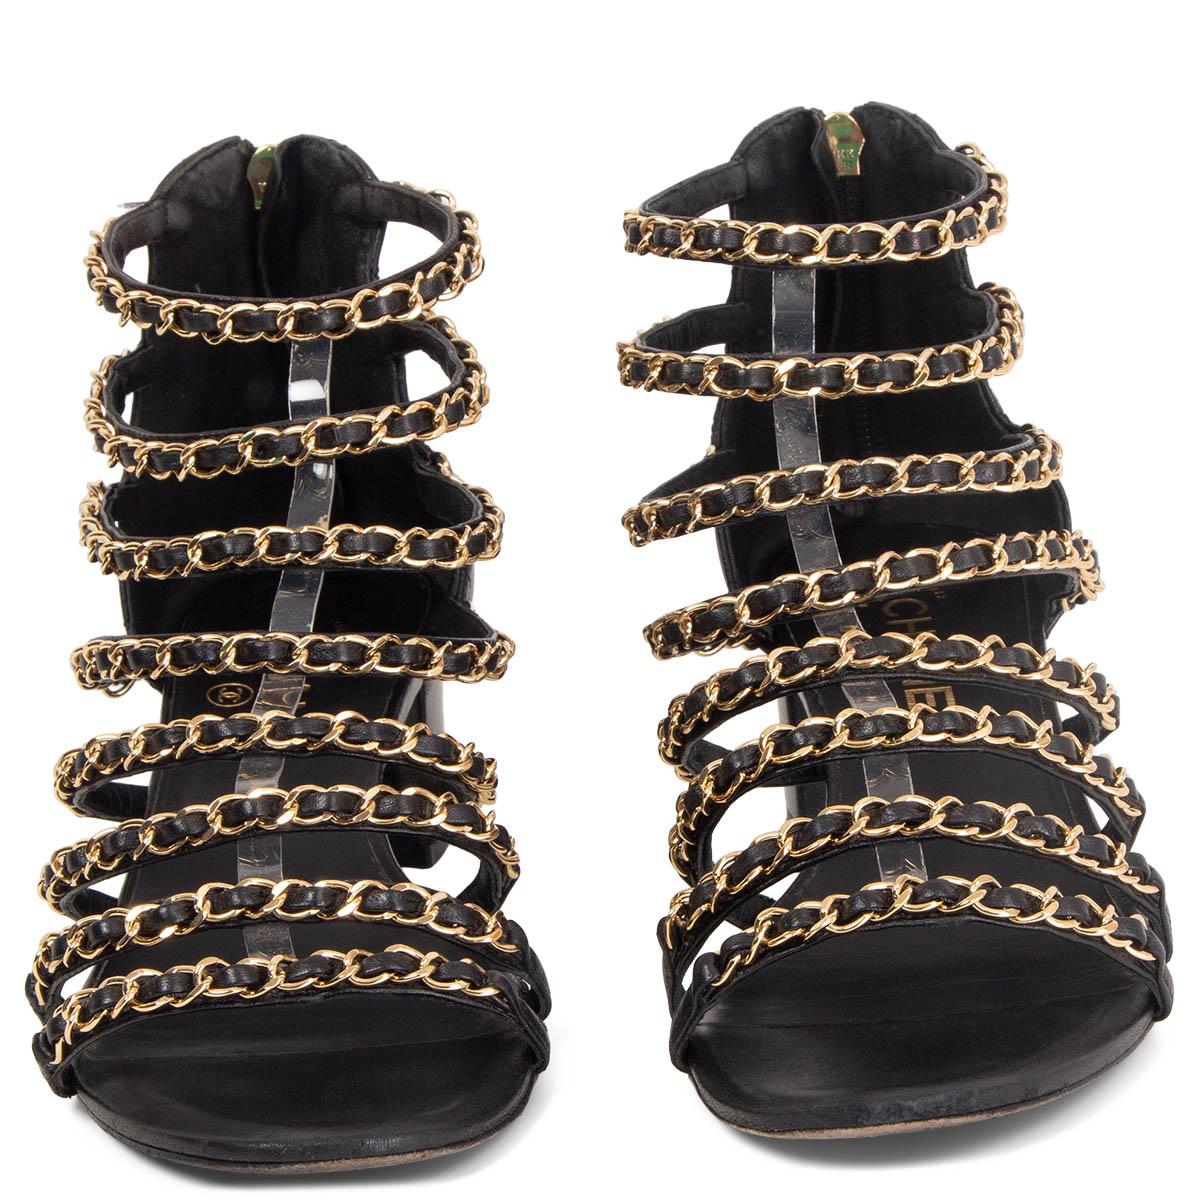 100% authentic Chanel block-heel sandals in black quilted lambskin embellished with gold-tone metal chains. Open with a zipper at the heel. Have been worn and show signs of wear to the tip and a very worn sole. Overall in very good condition.